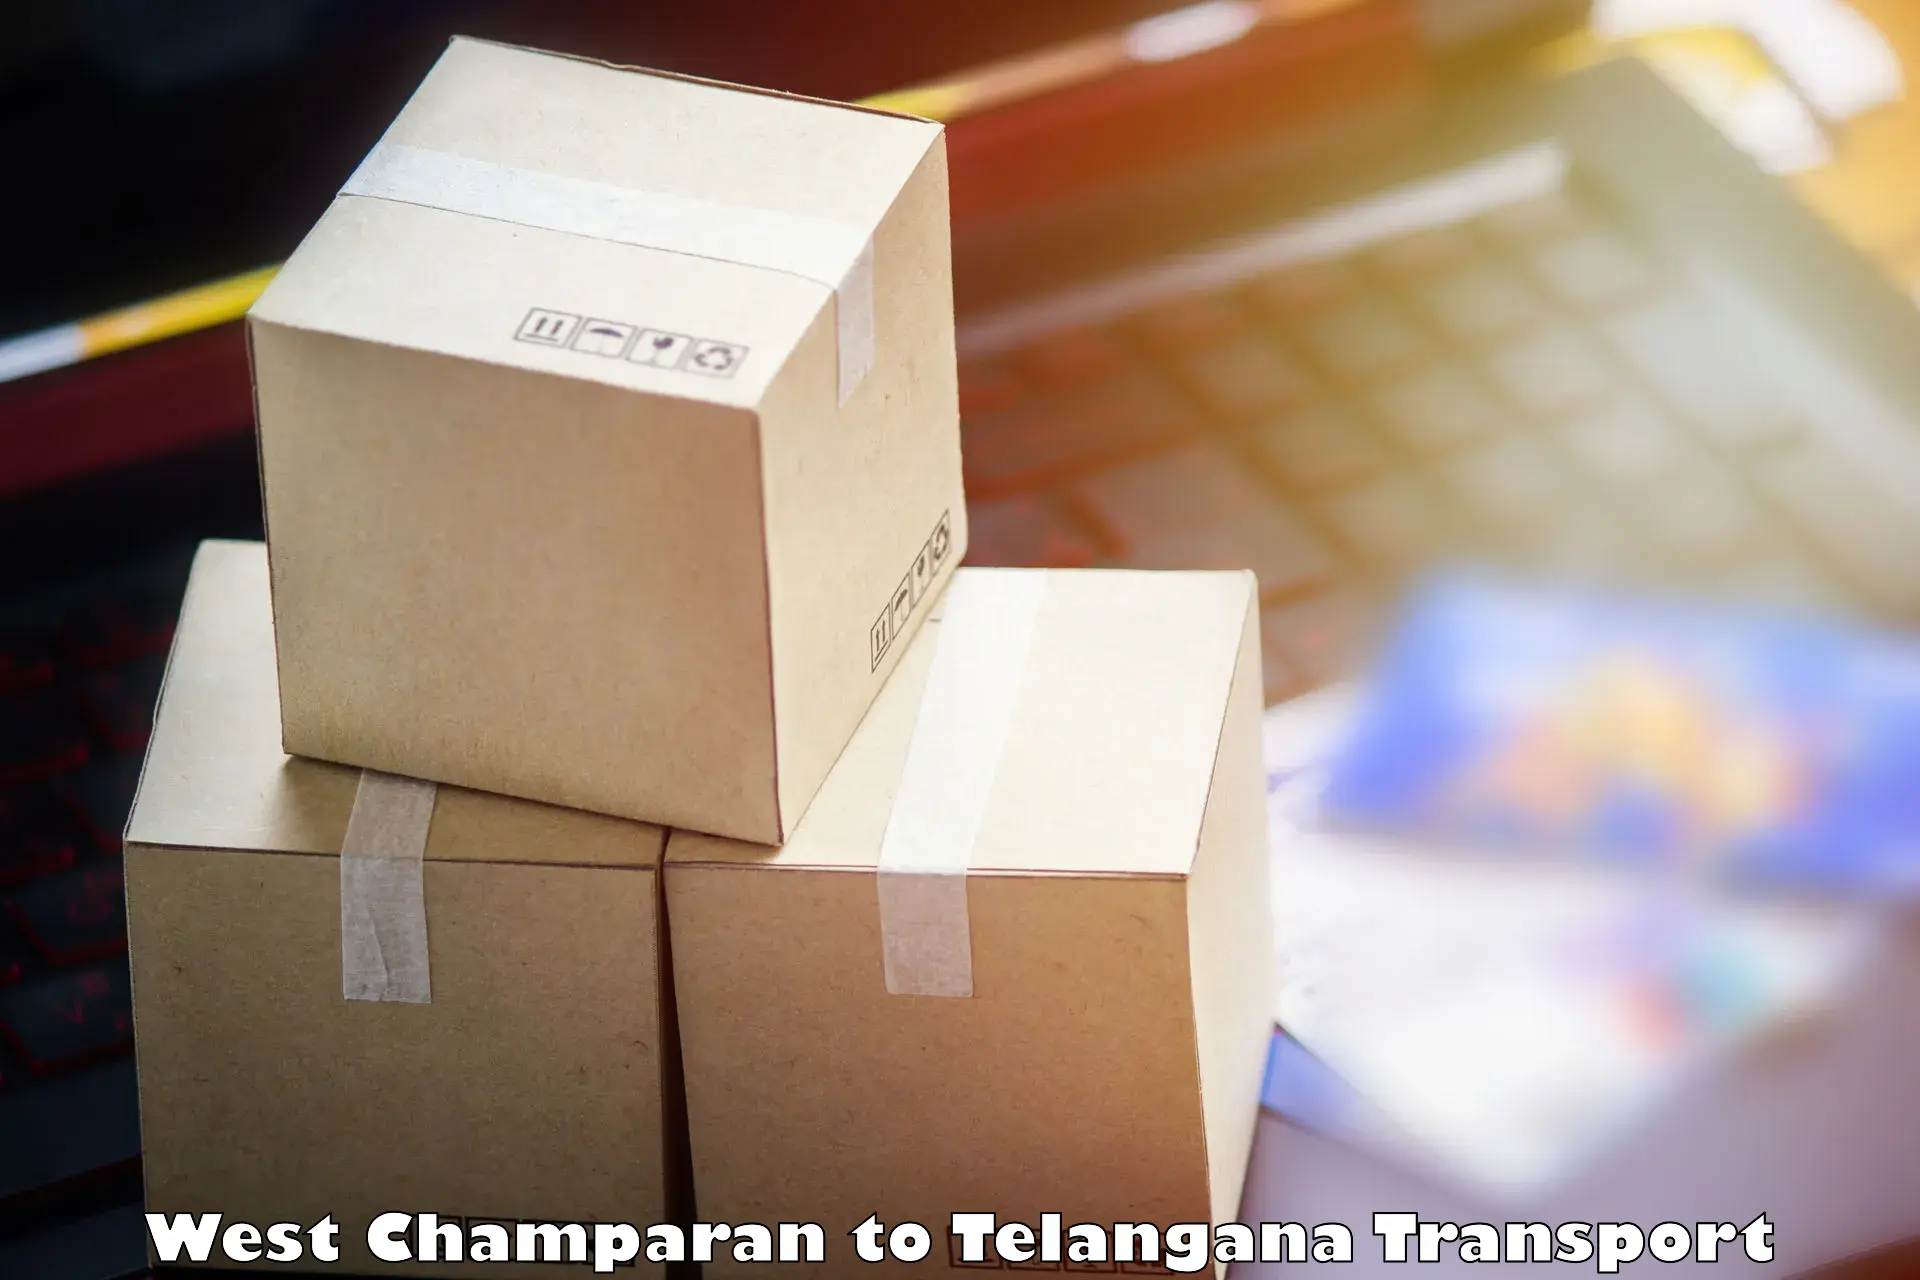 Online transport service West Champaran to Vemulawada